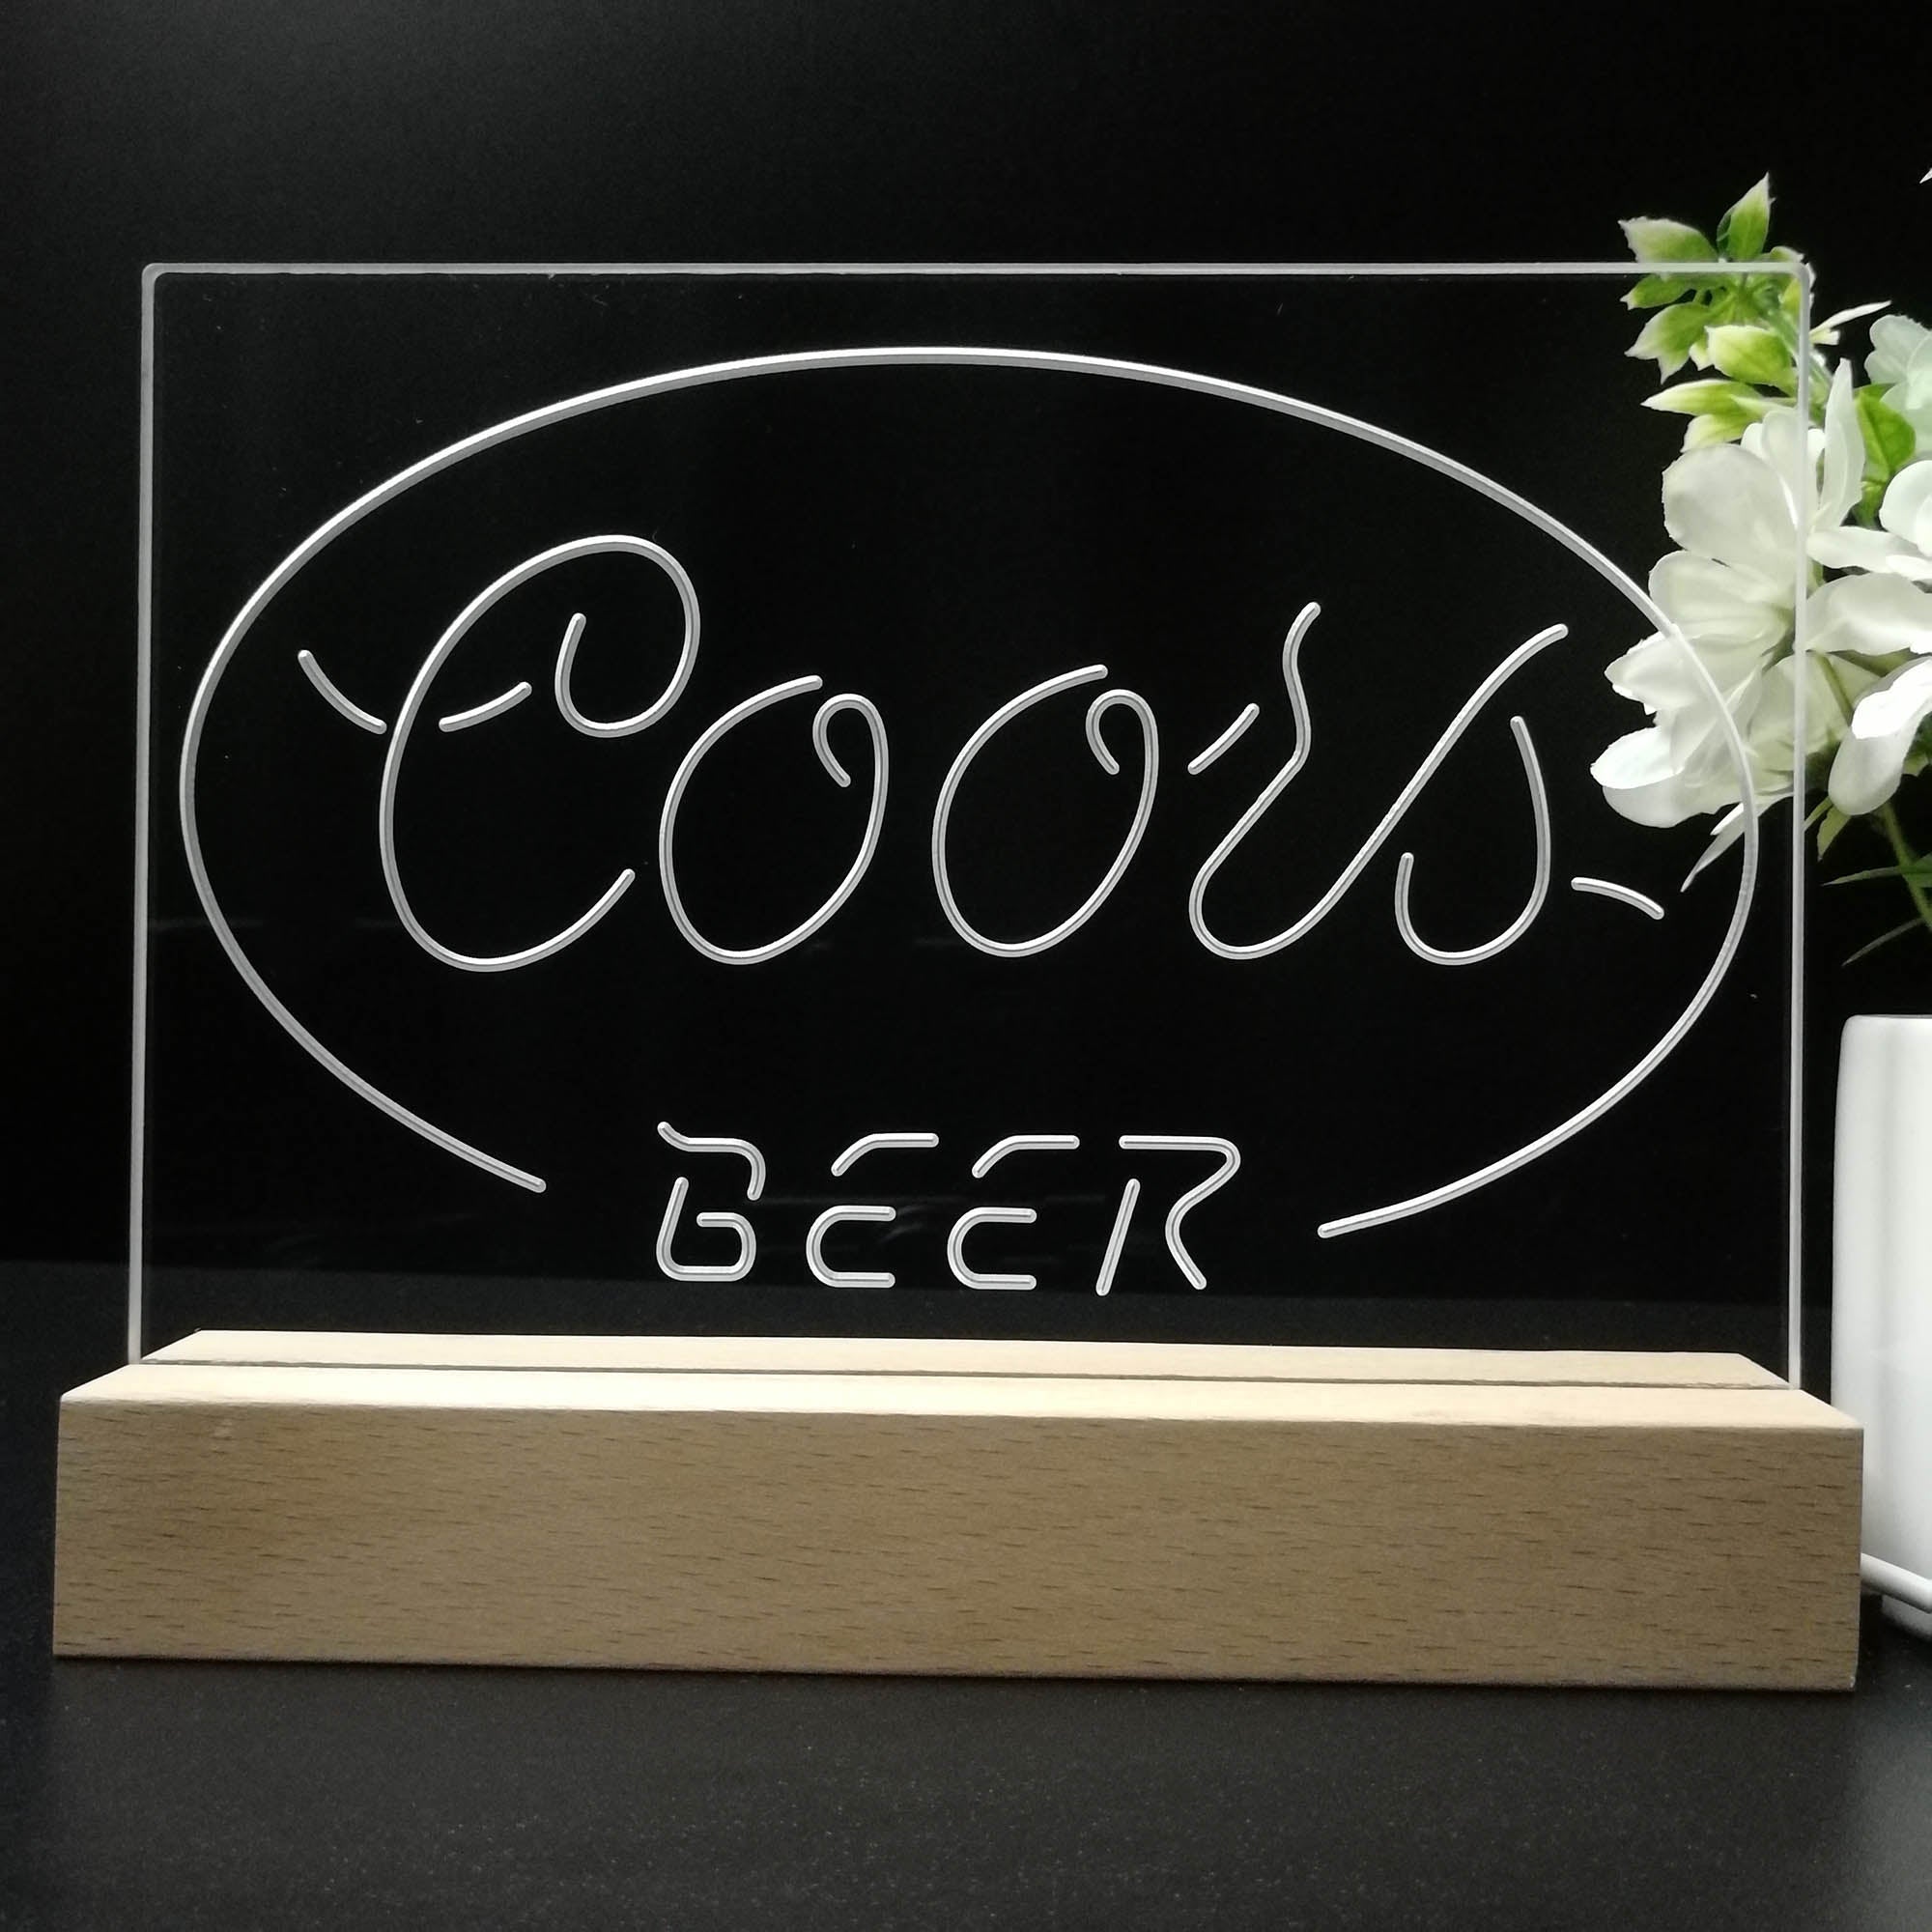 Coors Beer Oval Classic Night Light LED Sign